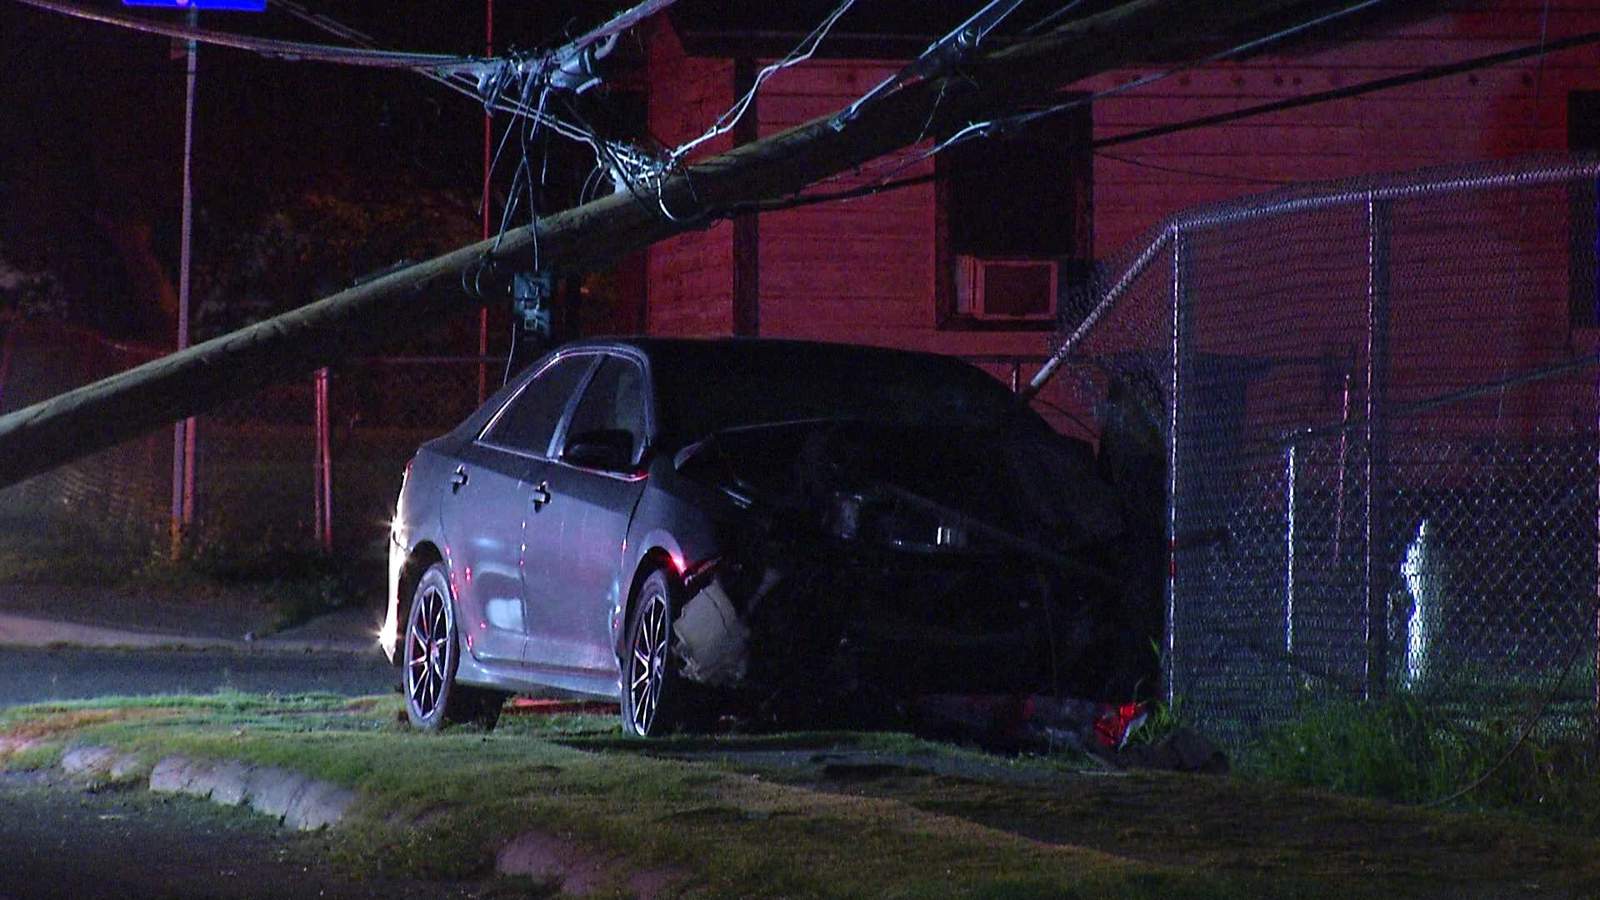 Driver loses control of vehicle, crashes into pole and fence, police say